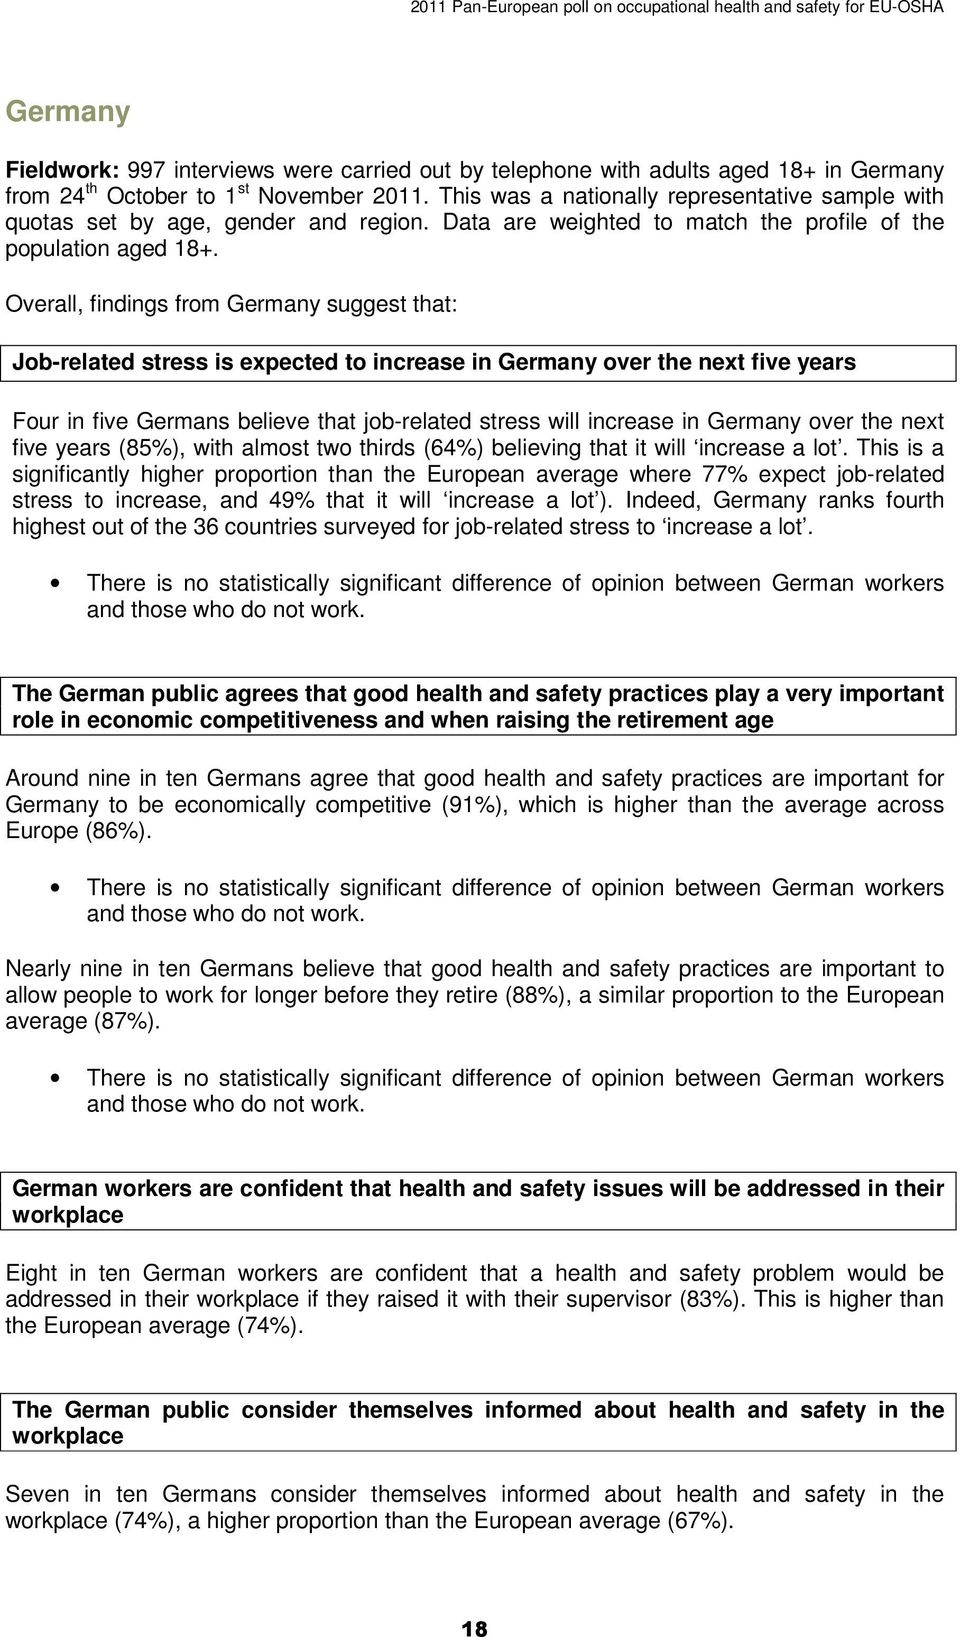 Overall, findings from Germany suggest that: Job-related stress is expected to increase in Germany over the next five years Four in five Germans believe that job-related stress will increase in